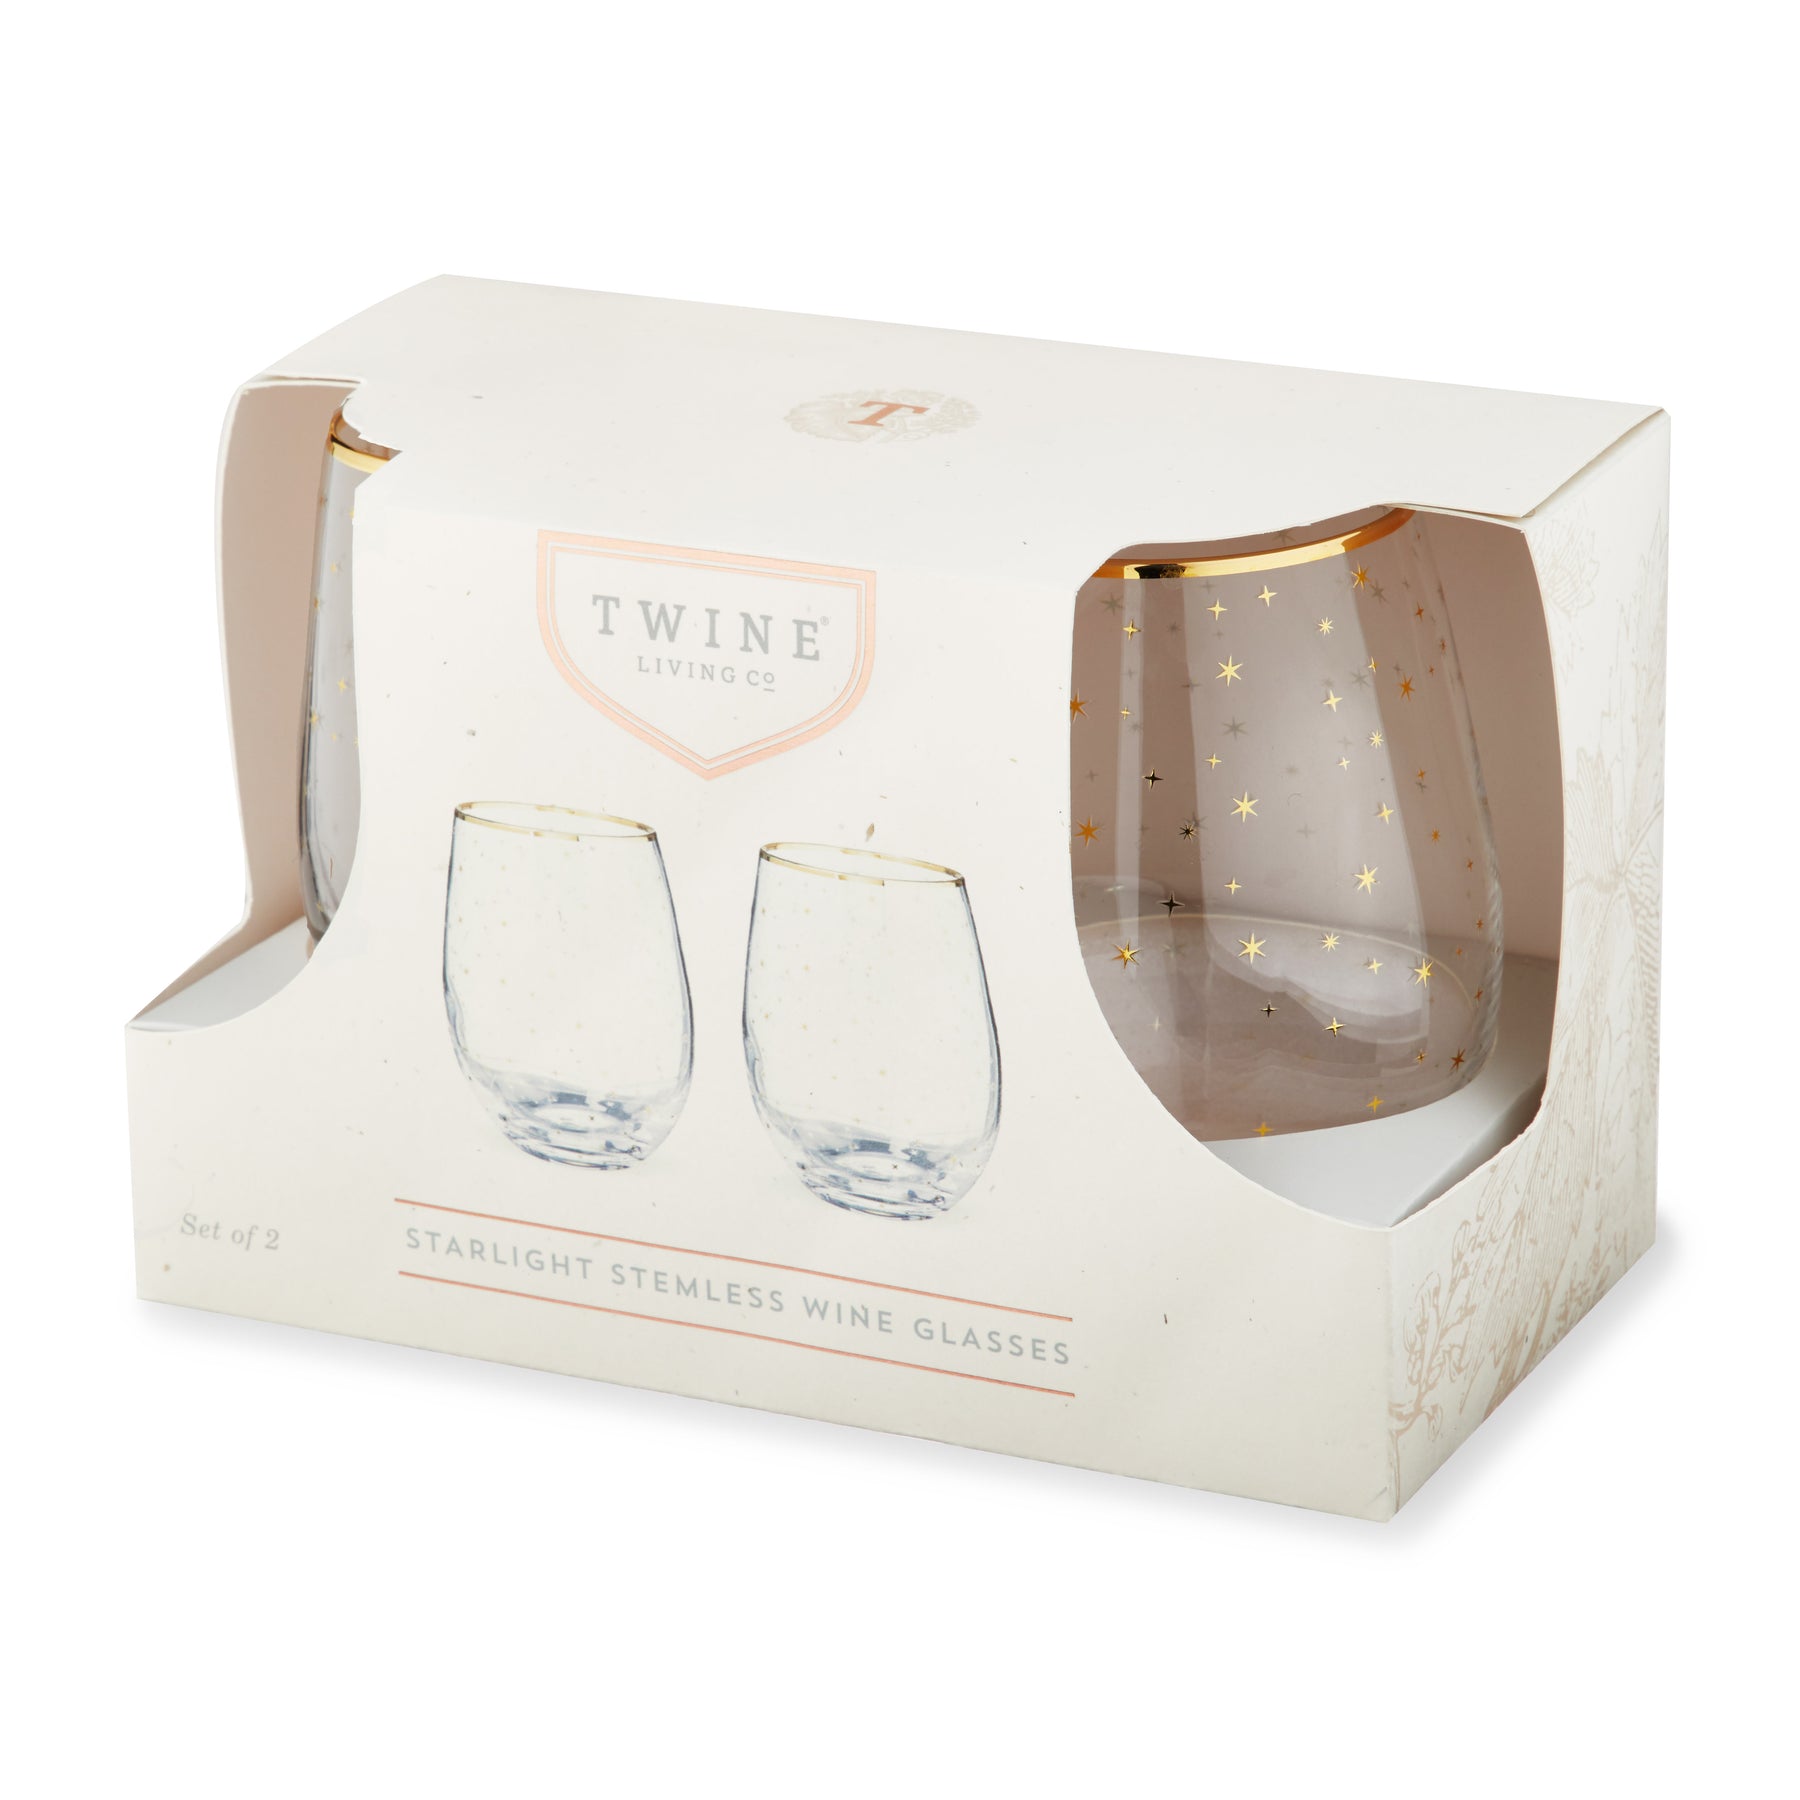 Twine Living Co Rose Crystal White Wine Glasses - Set of 2 - New